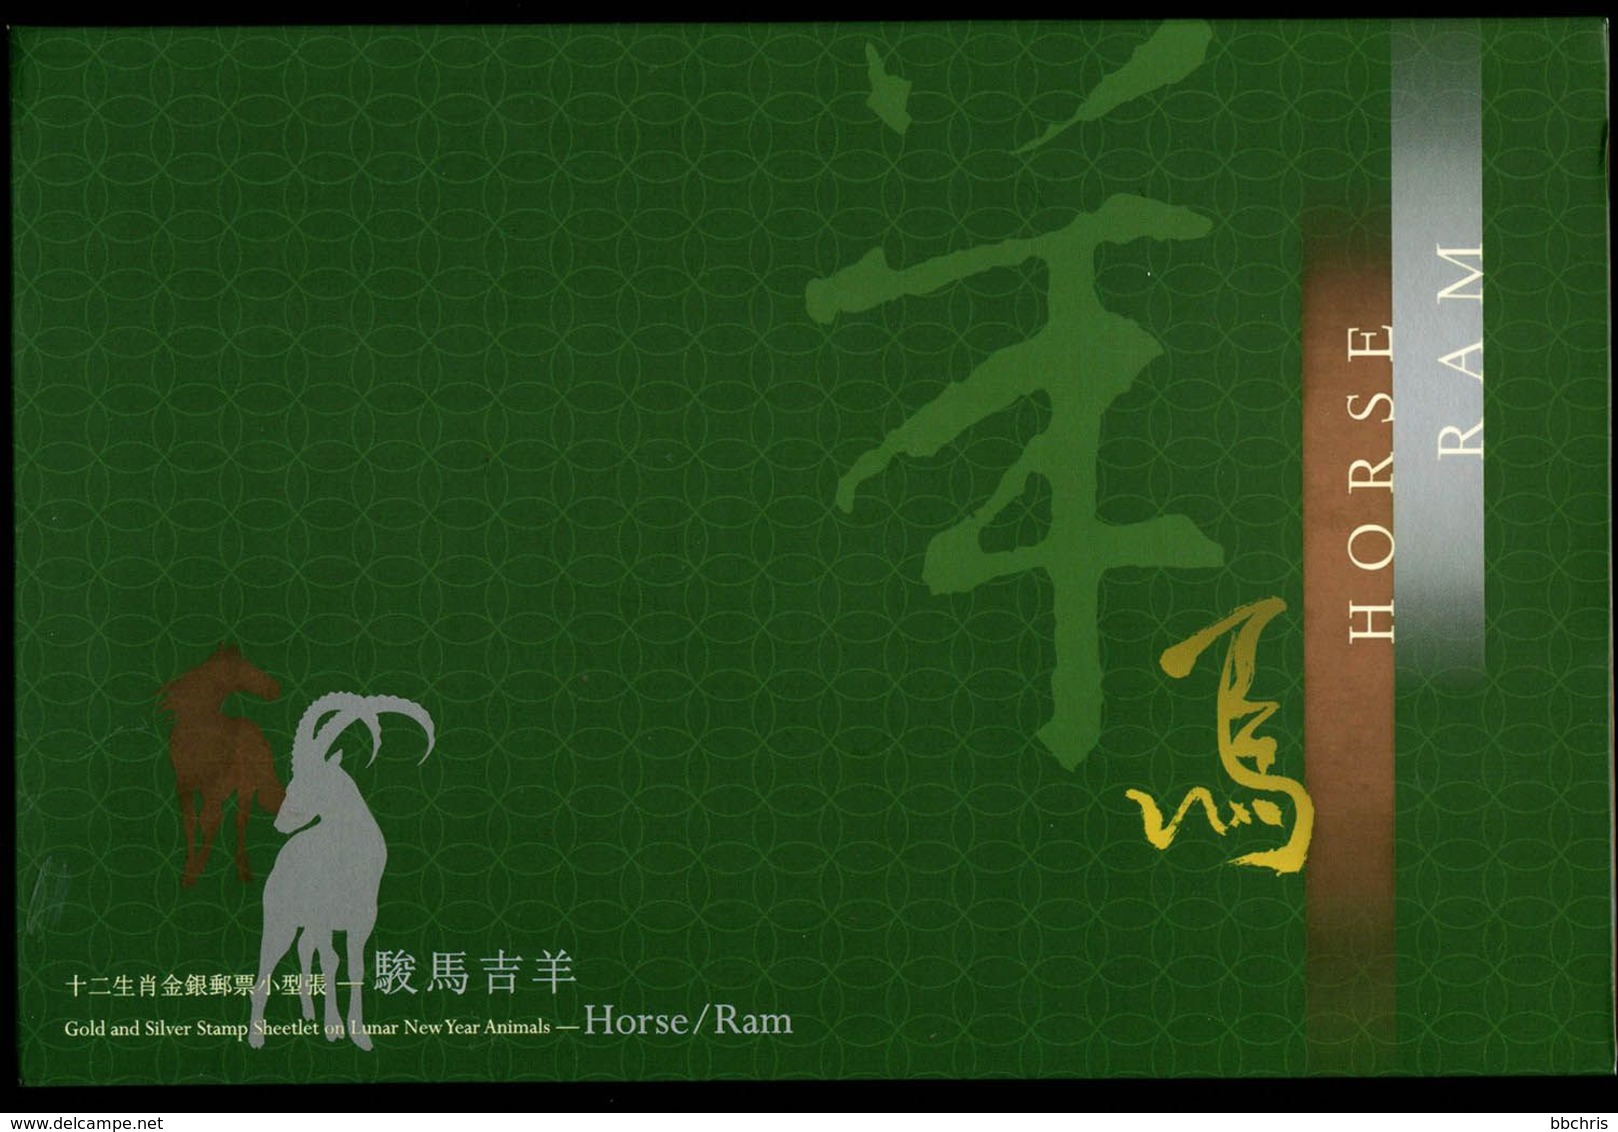 Hong Kong China 2003 New Year Gold Silver Horse Ram Stamps S/S Presentation Pack - Booklets